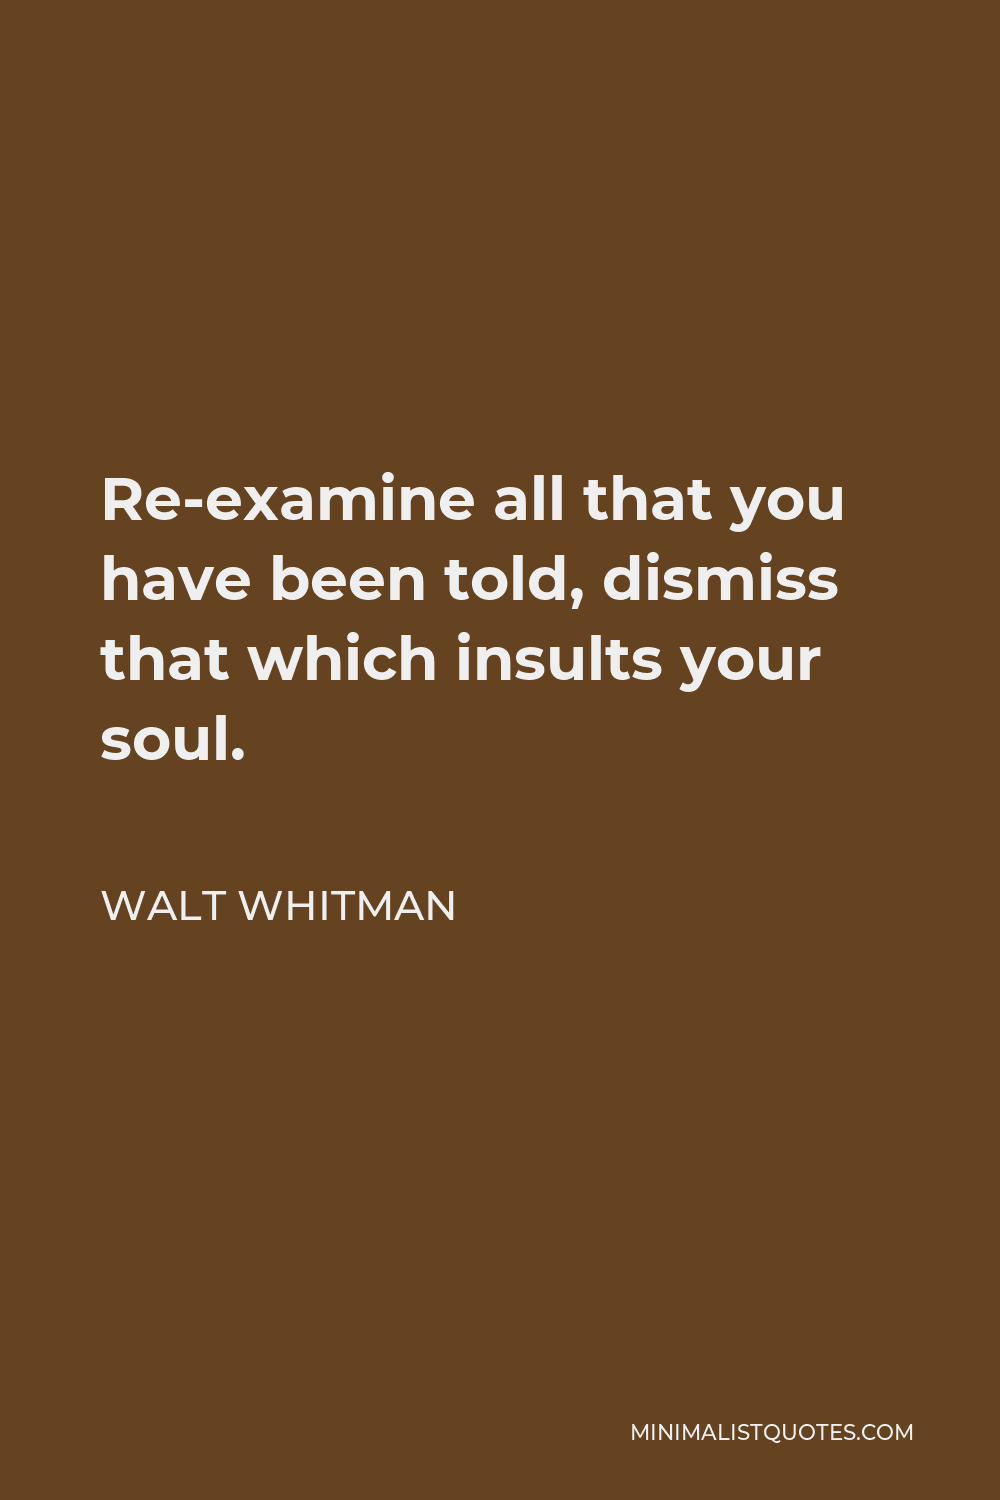 Walt Whitman Quote - Re-examine all that you have been told, dismiss that which insults your soul.